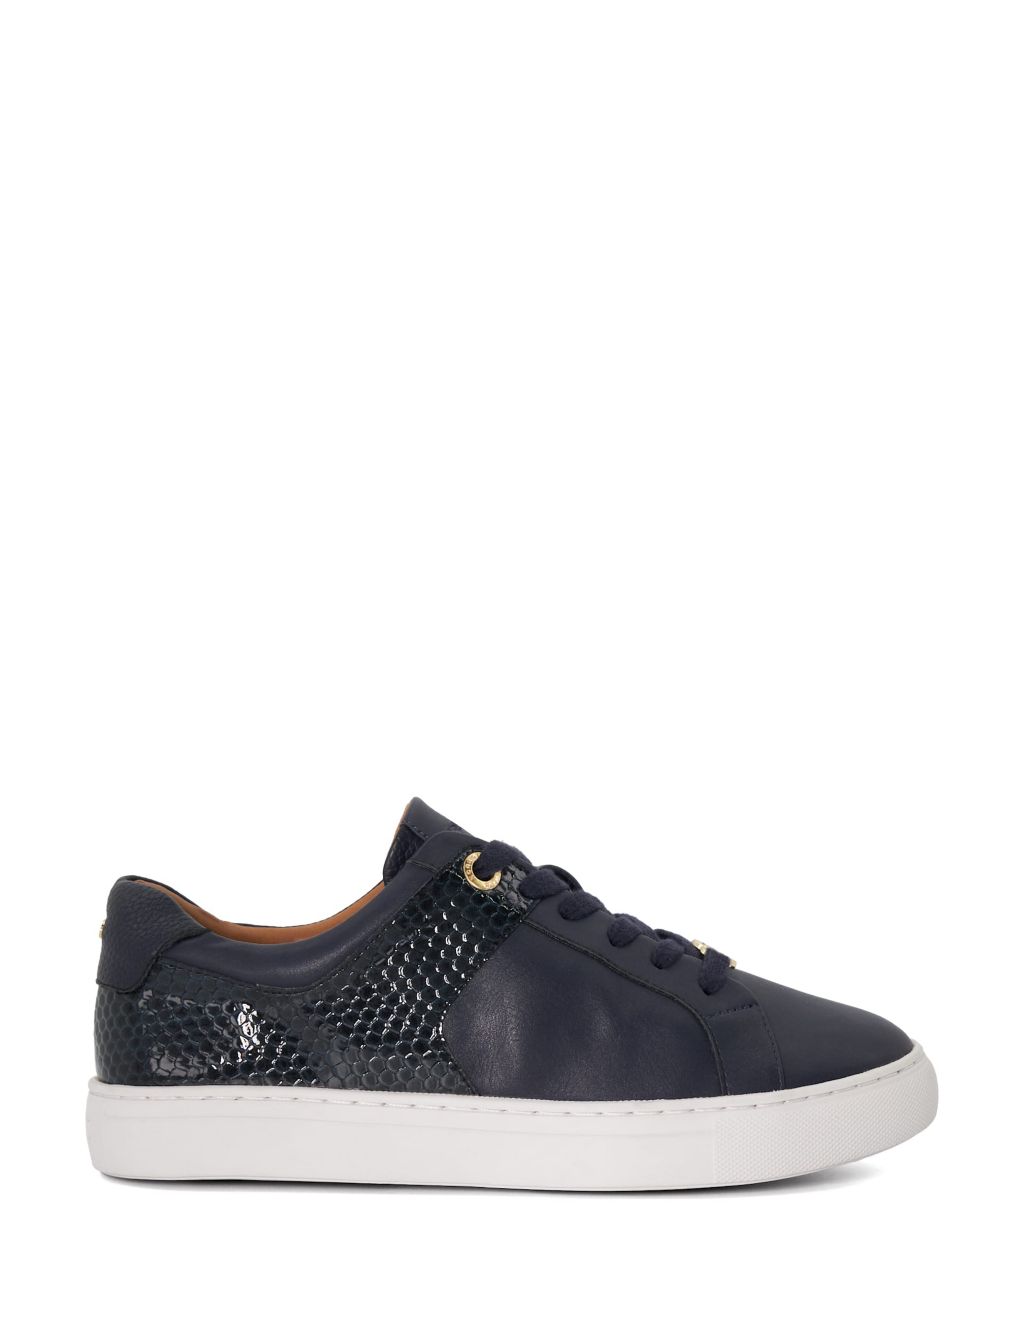 Lace Up Eyelet Detail Trainers image 1